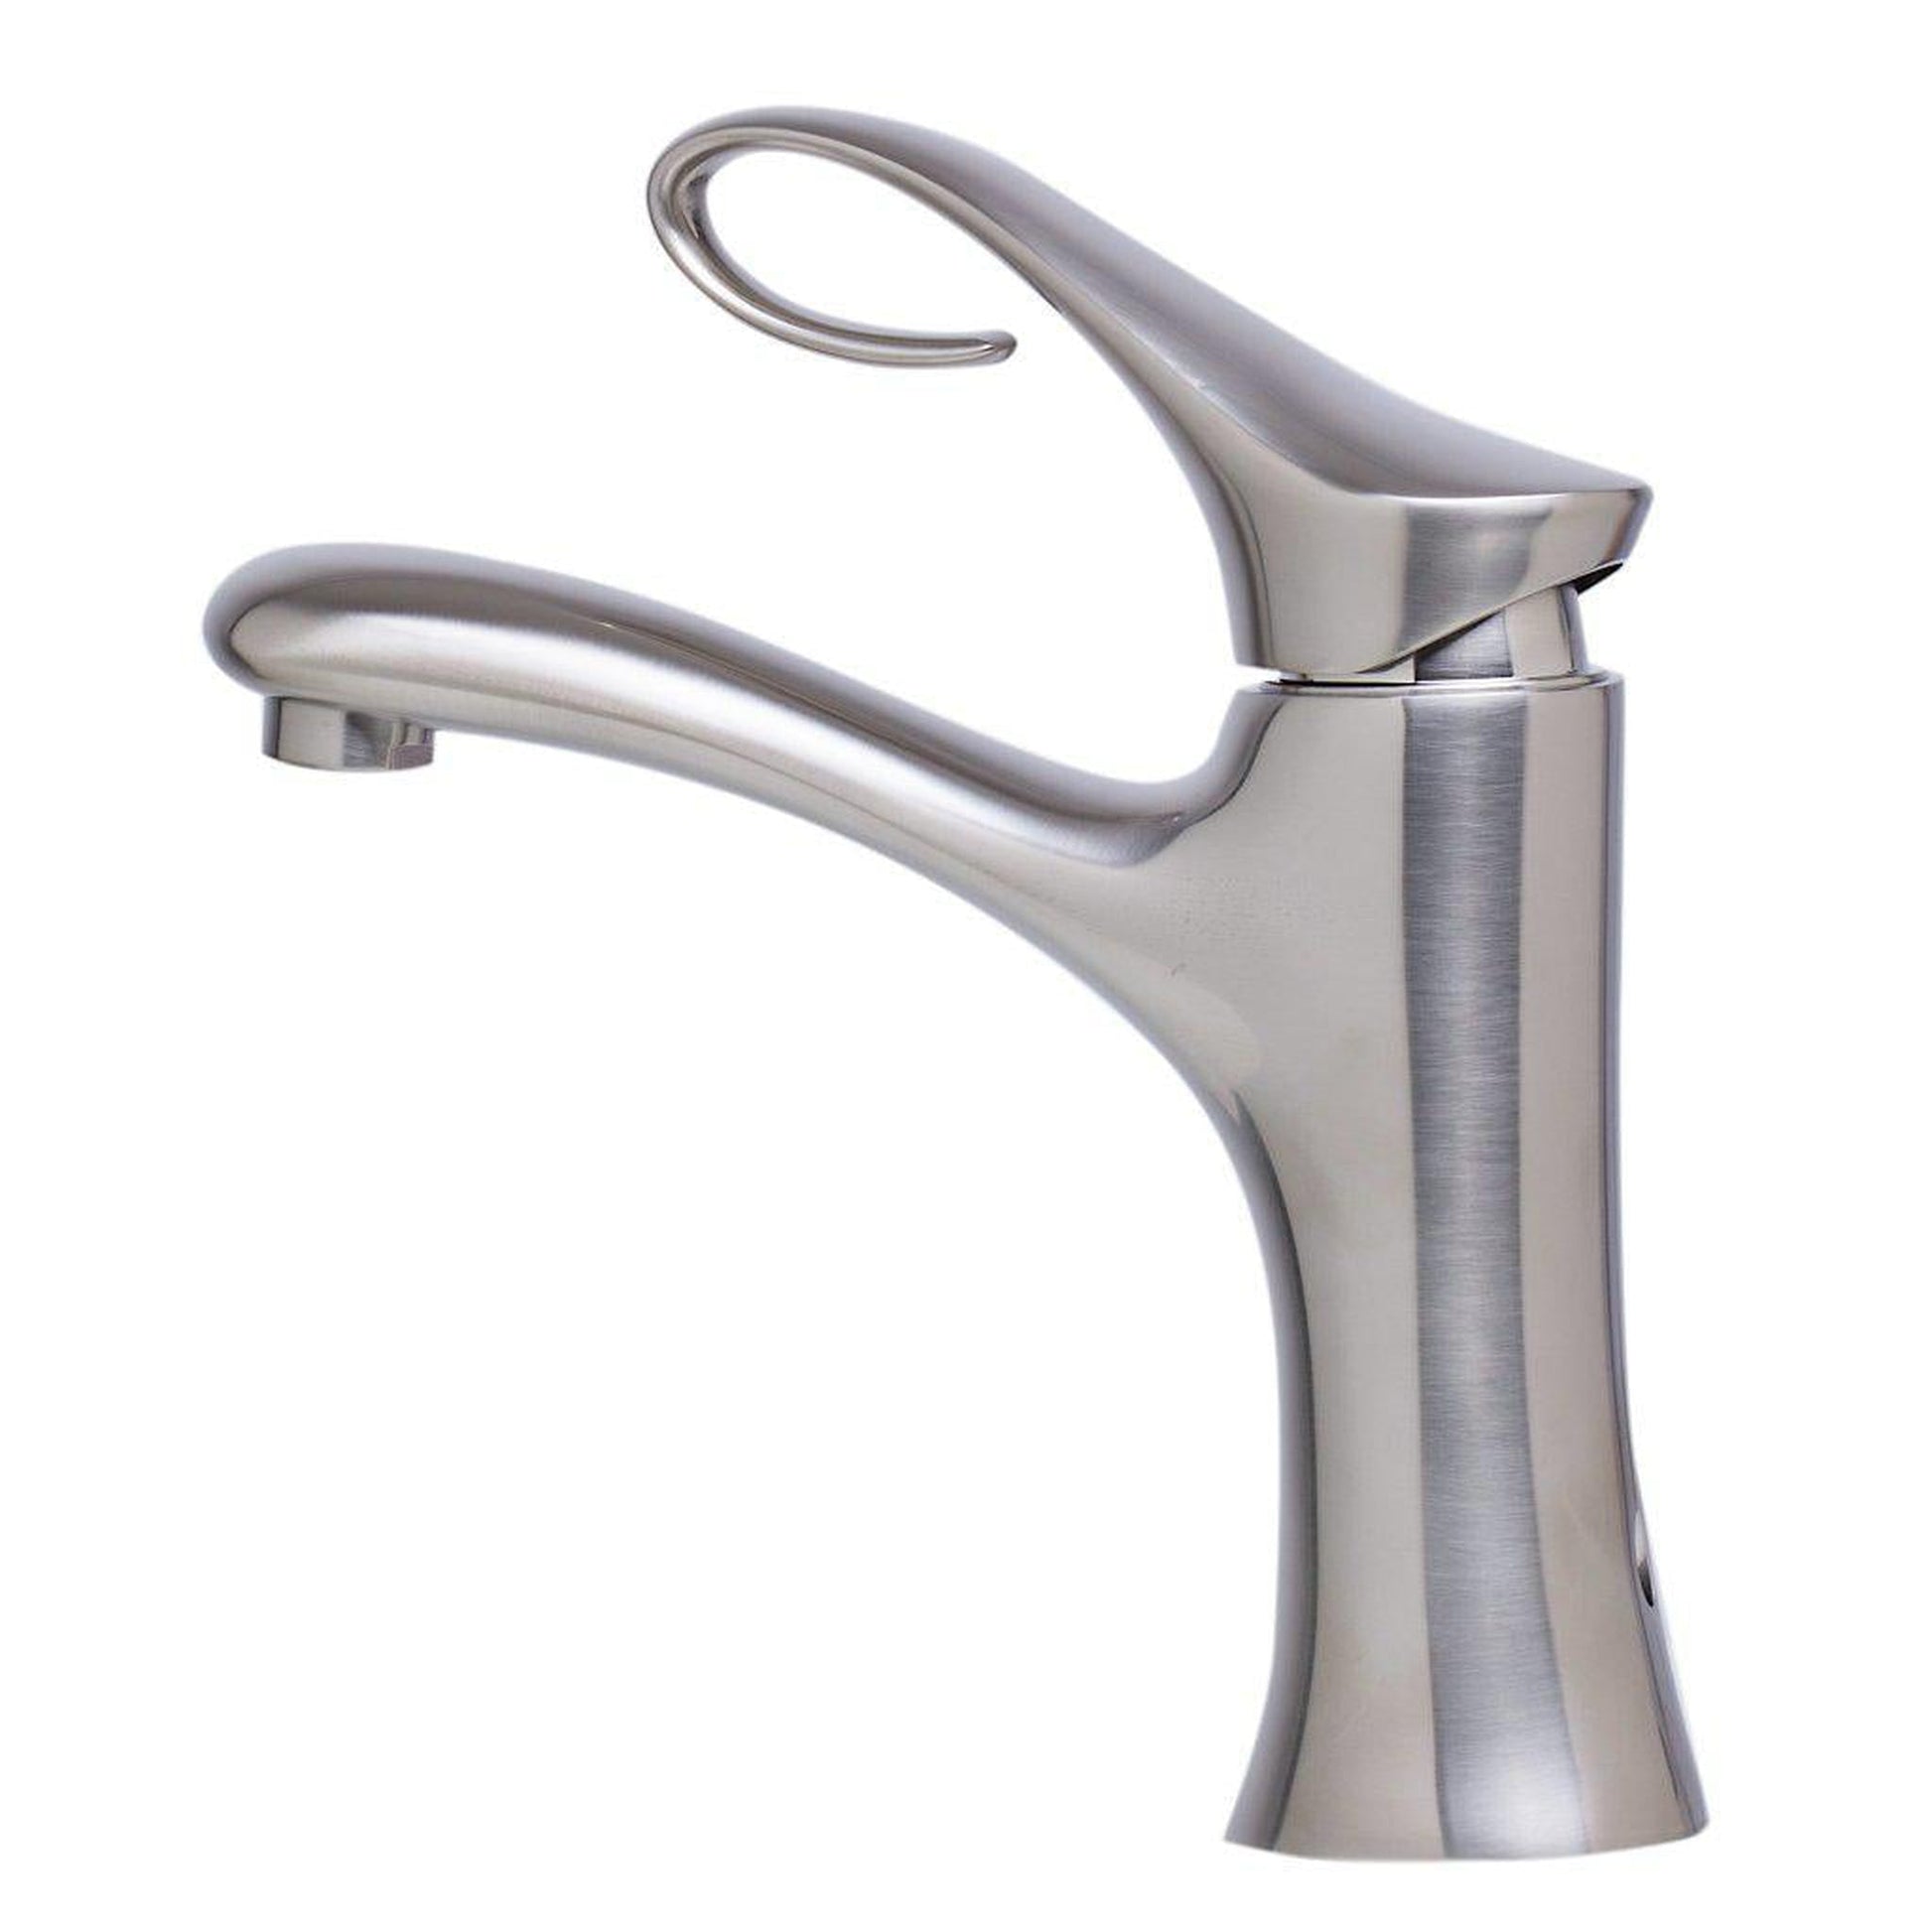 ALFI Brand AB1295-BN Brushed Nickel Single Hole Brass Bathroom Sink Faucet With Curled Single Lever